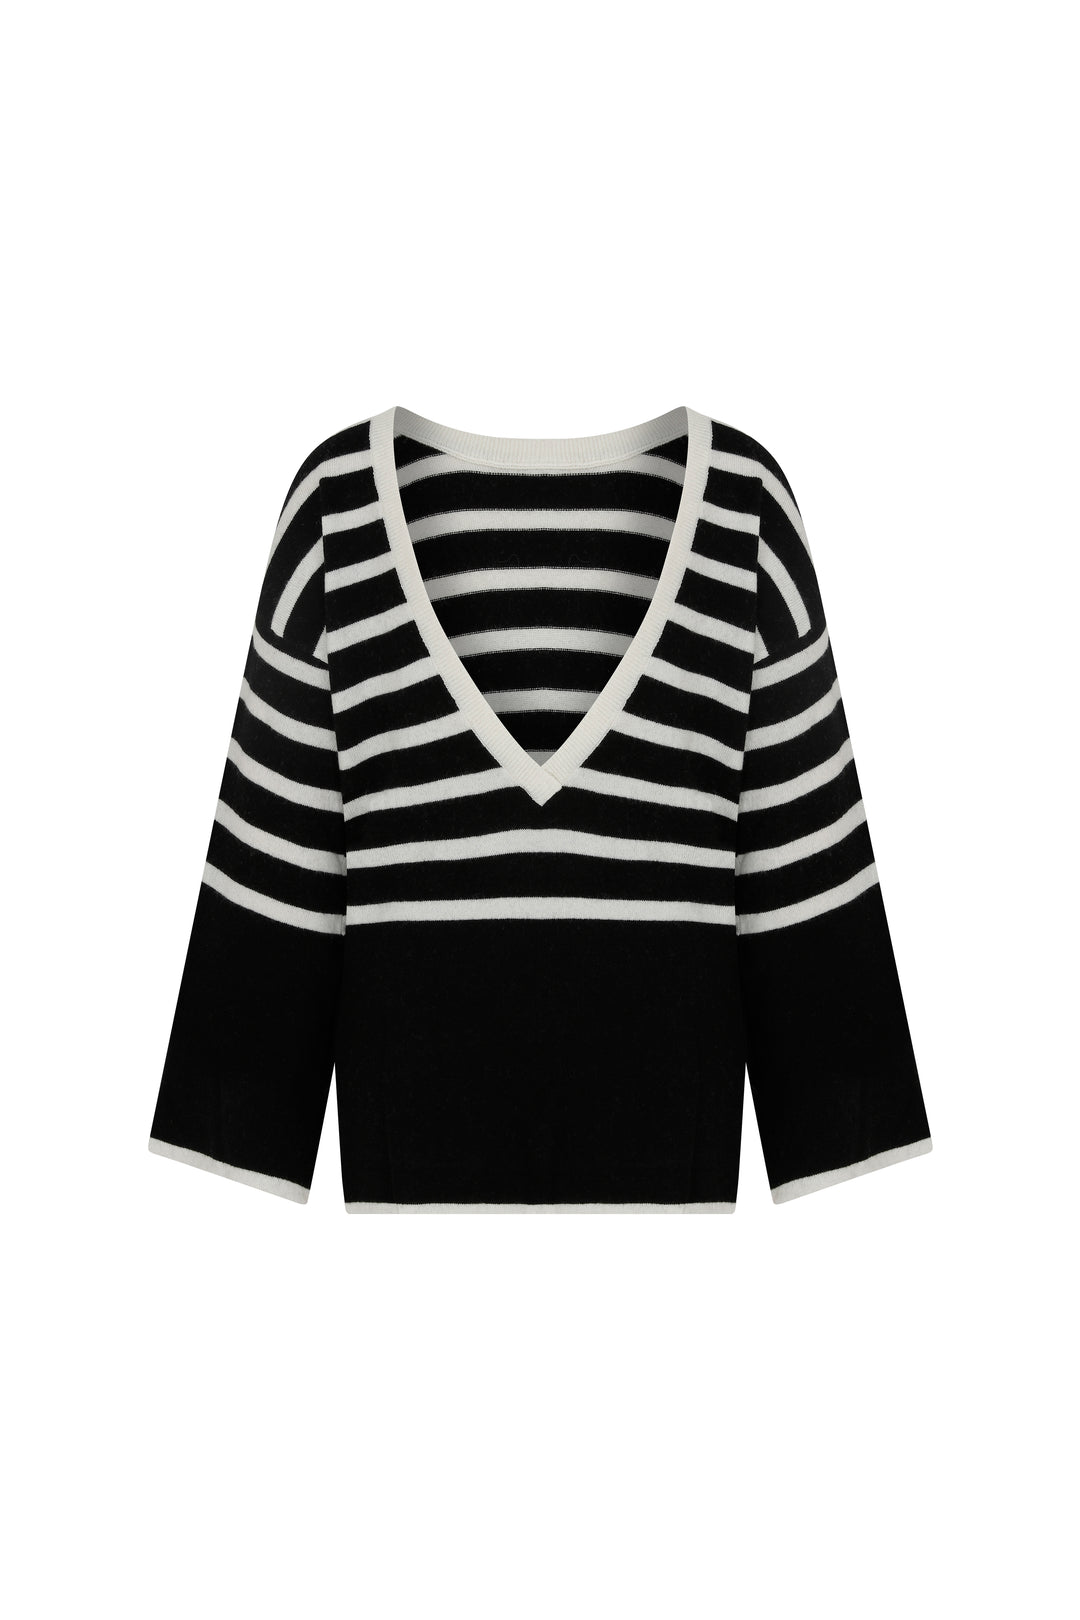 Tete - Open Back Cashmere Blended Black & White Striped Sweater